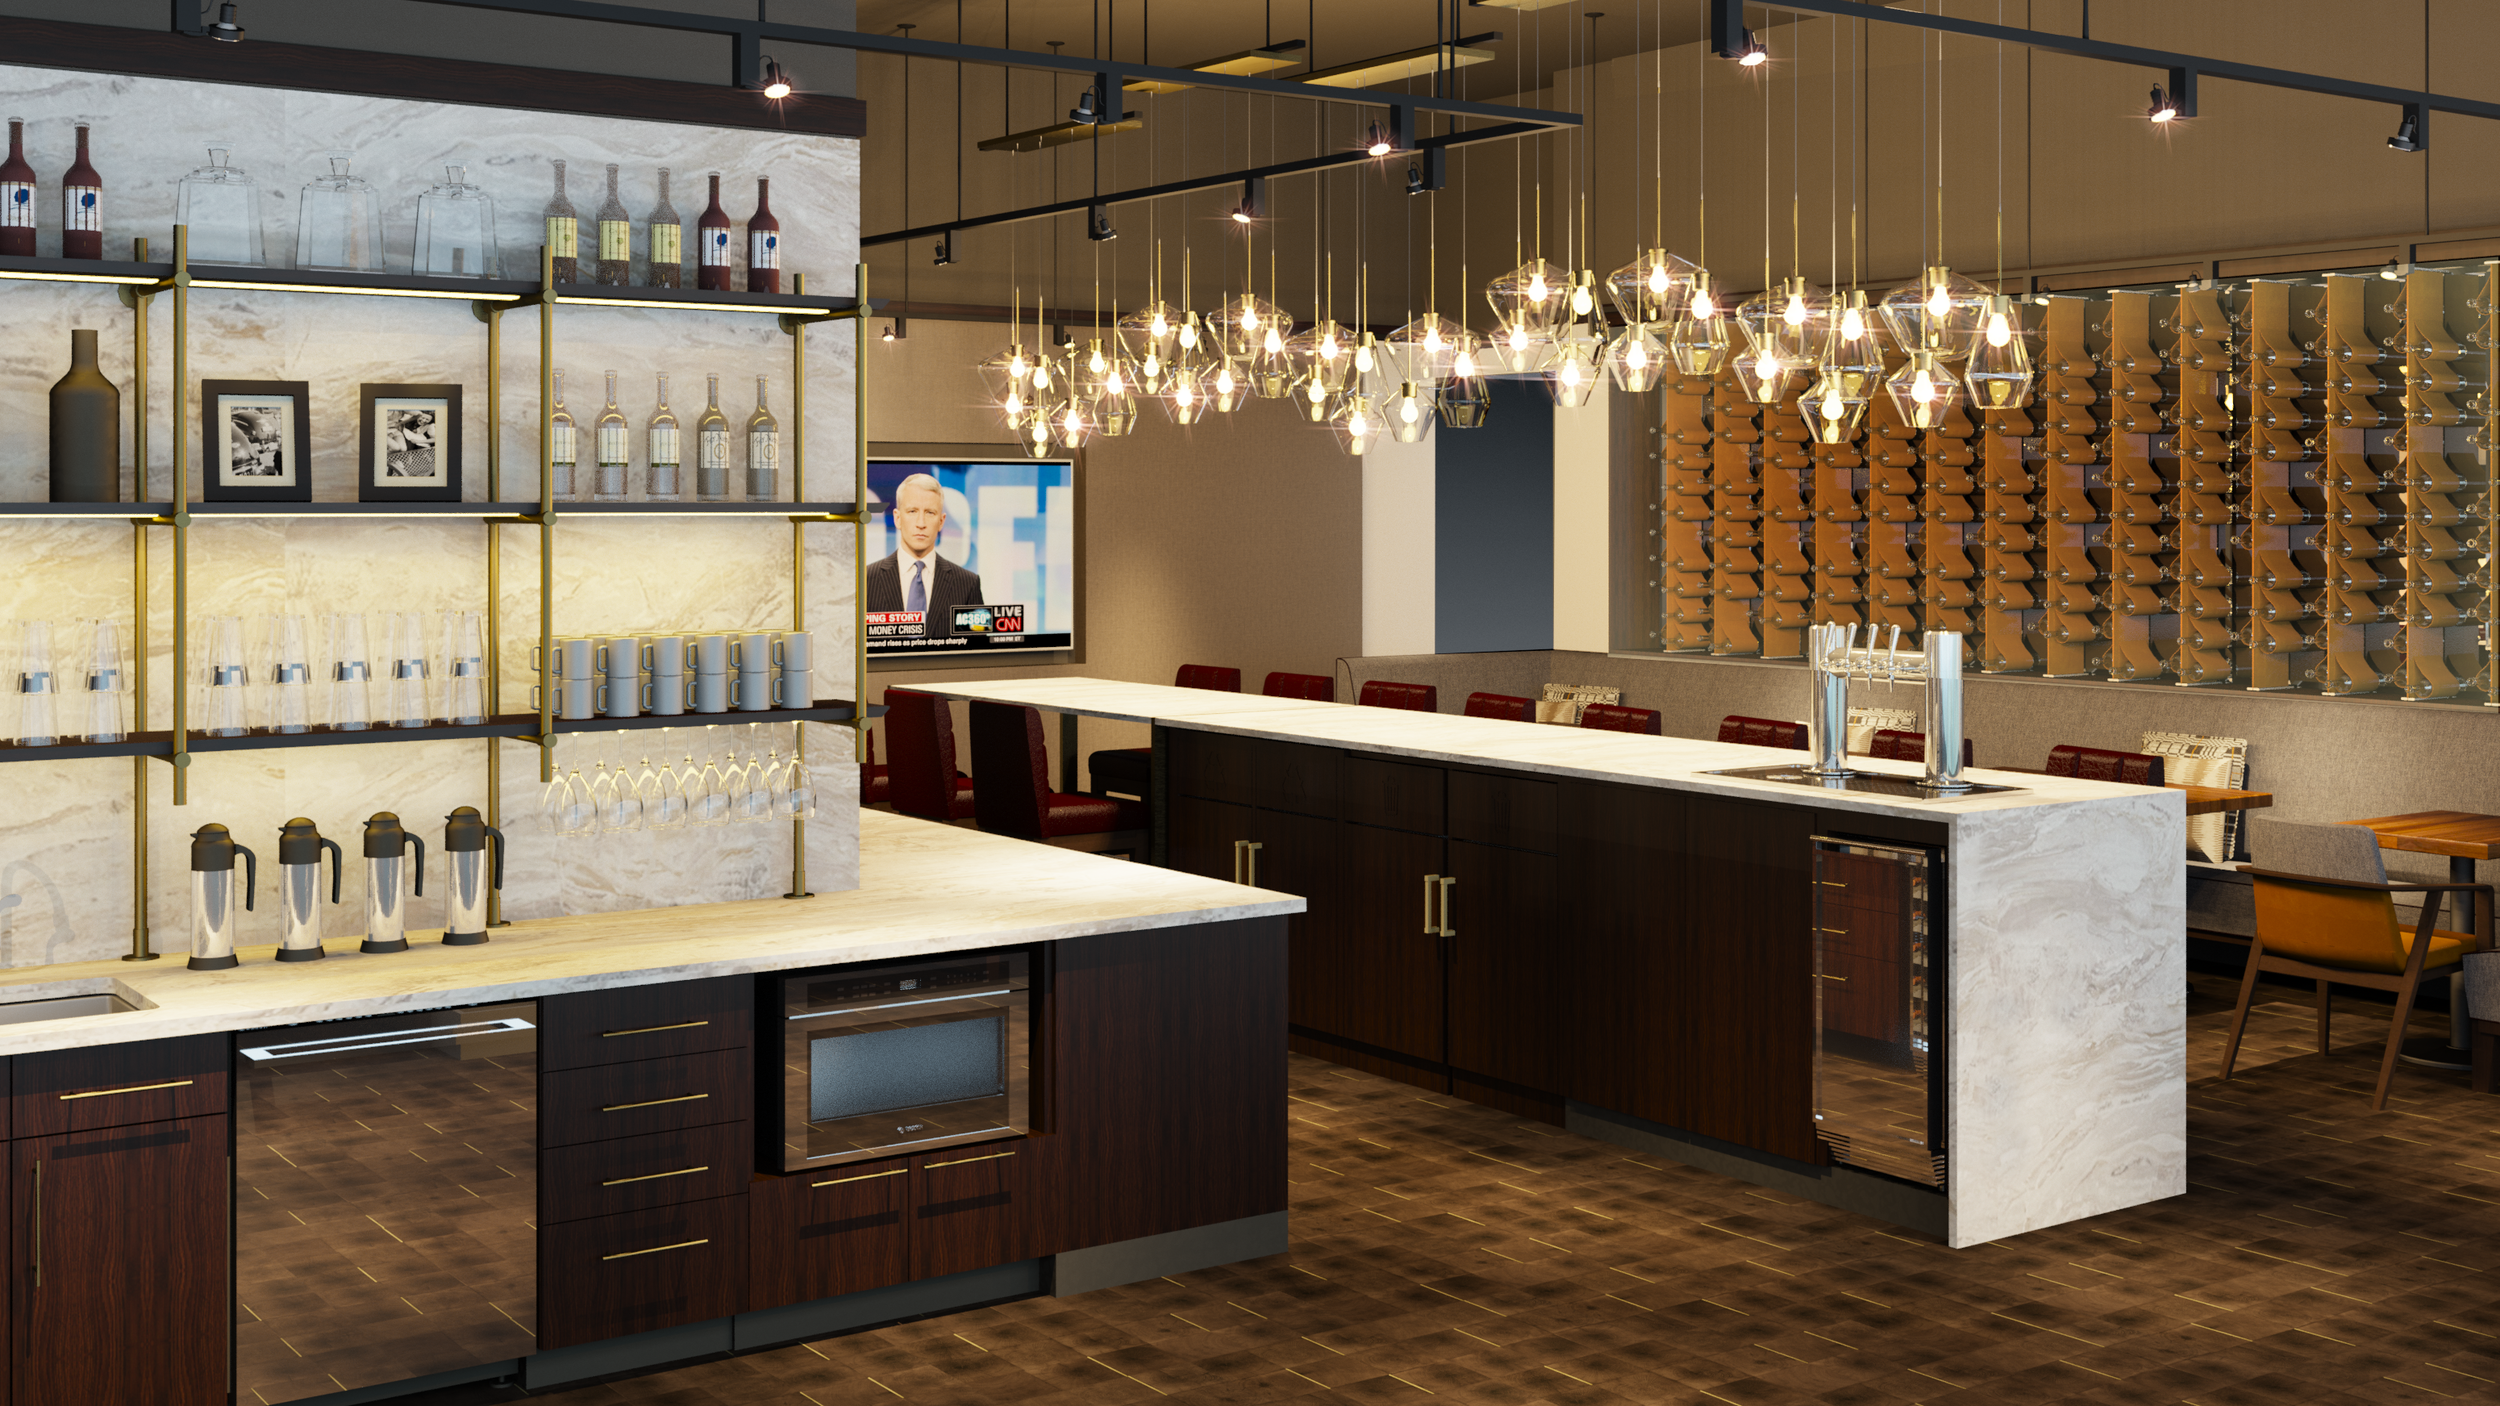 Coopers_Hawk_Hospitality_Kitchen Back with glow.png